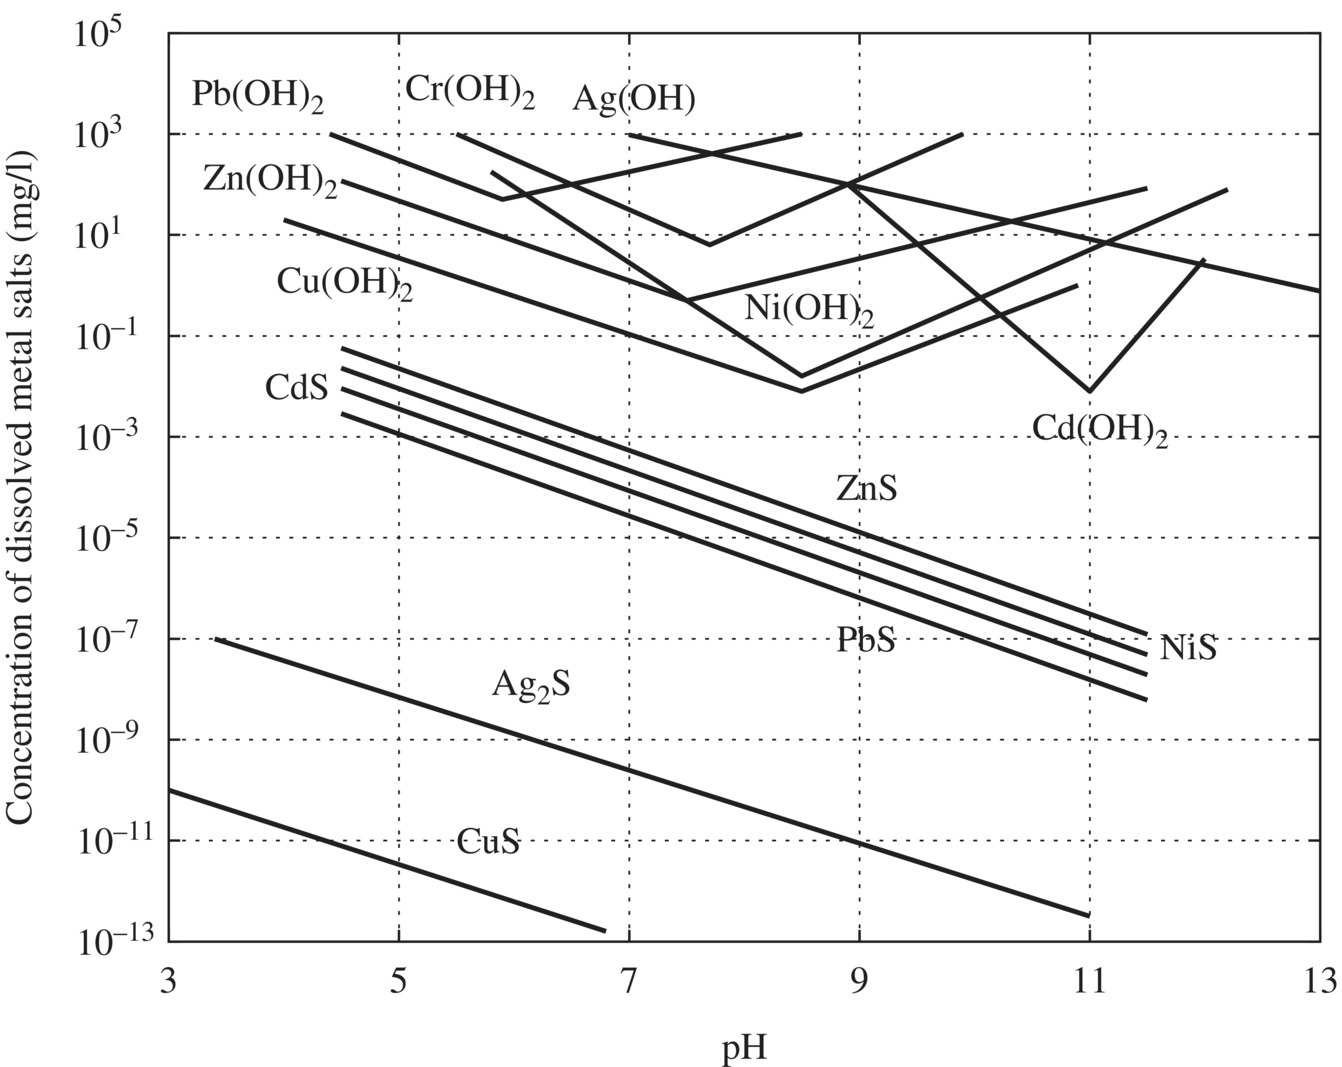 Solubility of metal hydroxides and sulfides as a function of pH displaying 7 descending lines labeled CuS, Ag2S, PbS, NiS, CdS, and Ag(OH) and 6 V-shaped curves labeled Cr(OH)2, Pb(OH)2, Zn(OH)2, Cu(OH)2, etc.